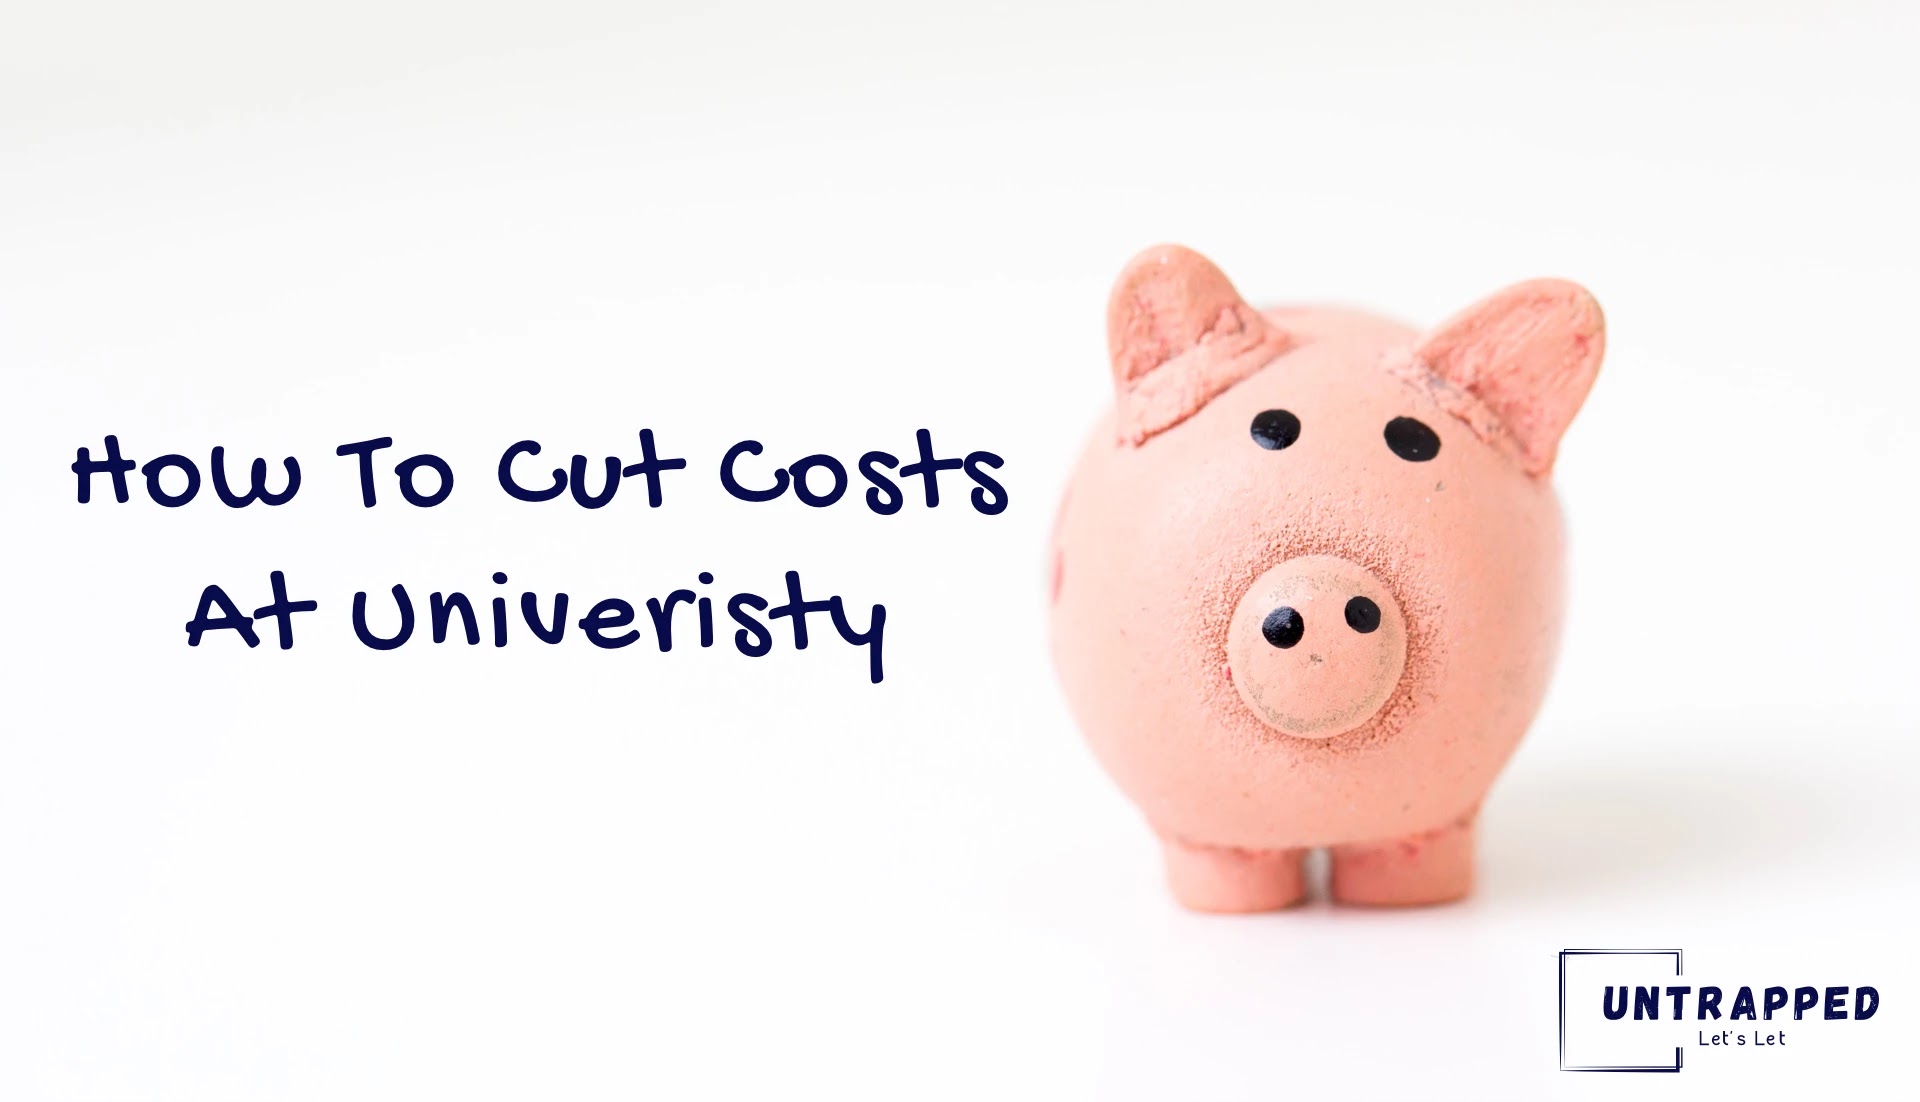 How can I cut costs at university